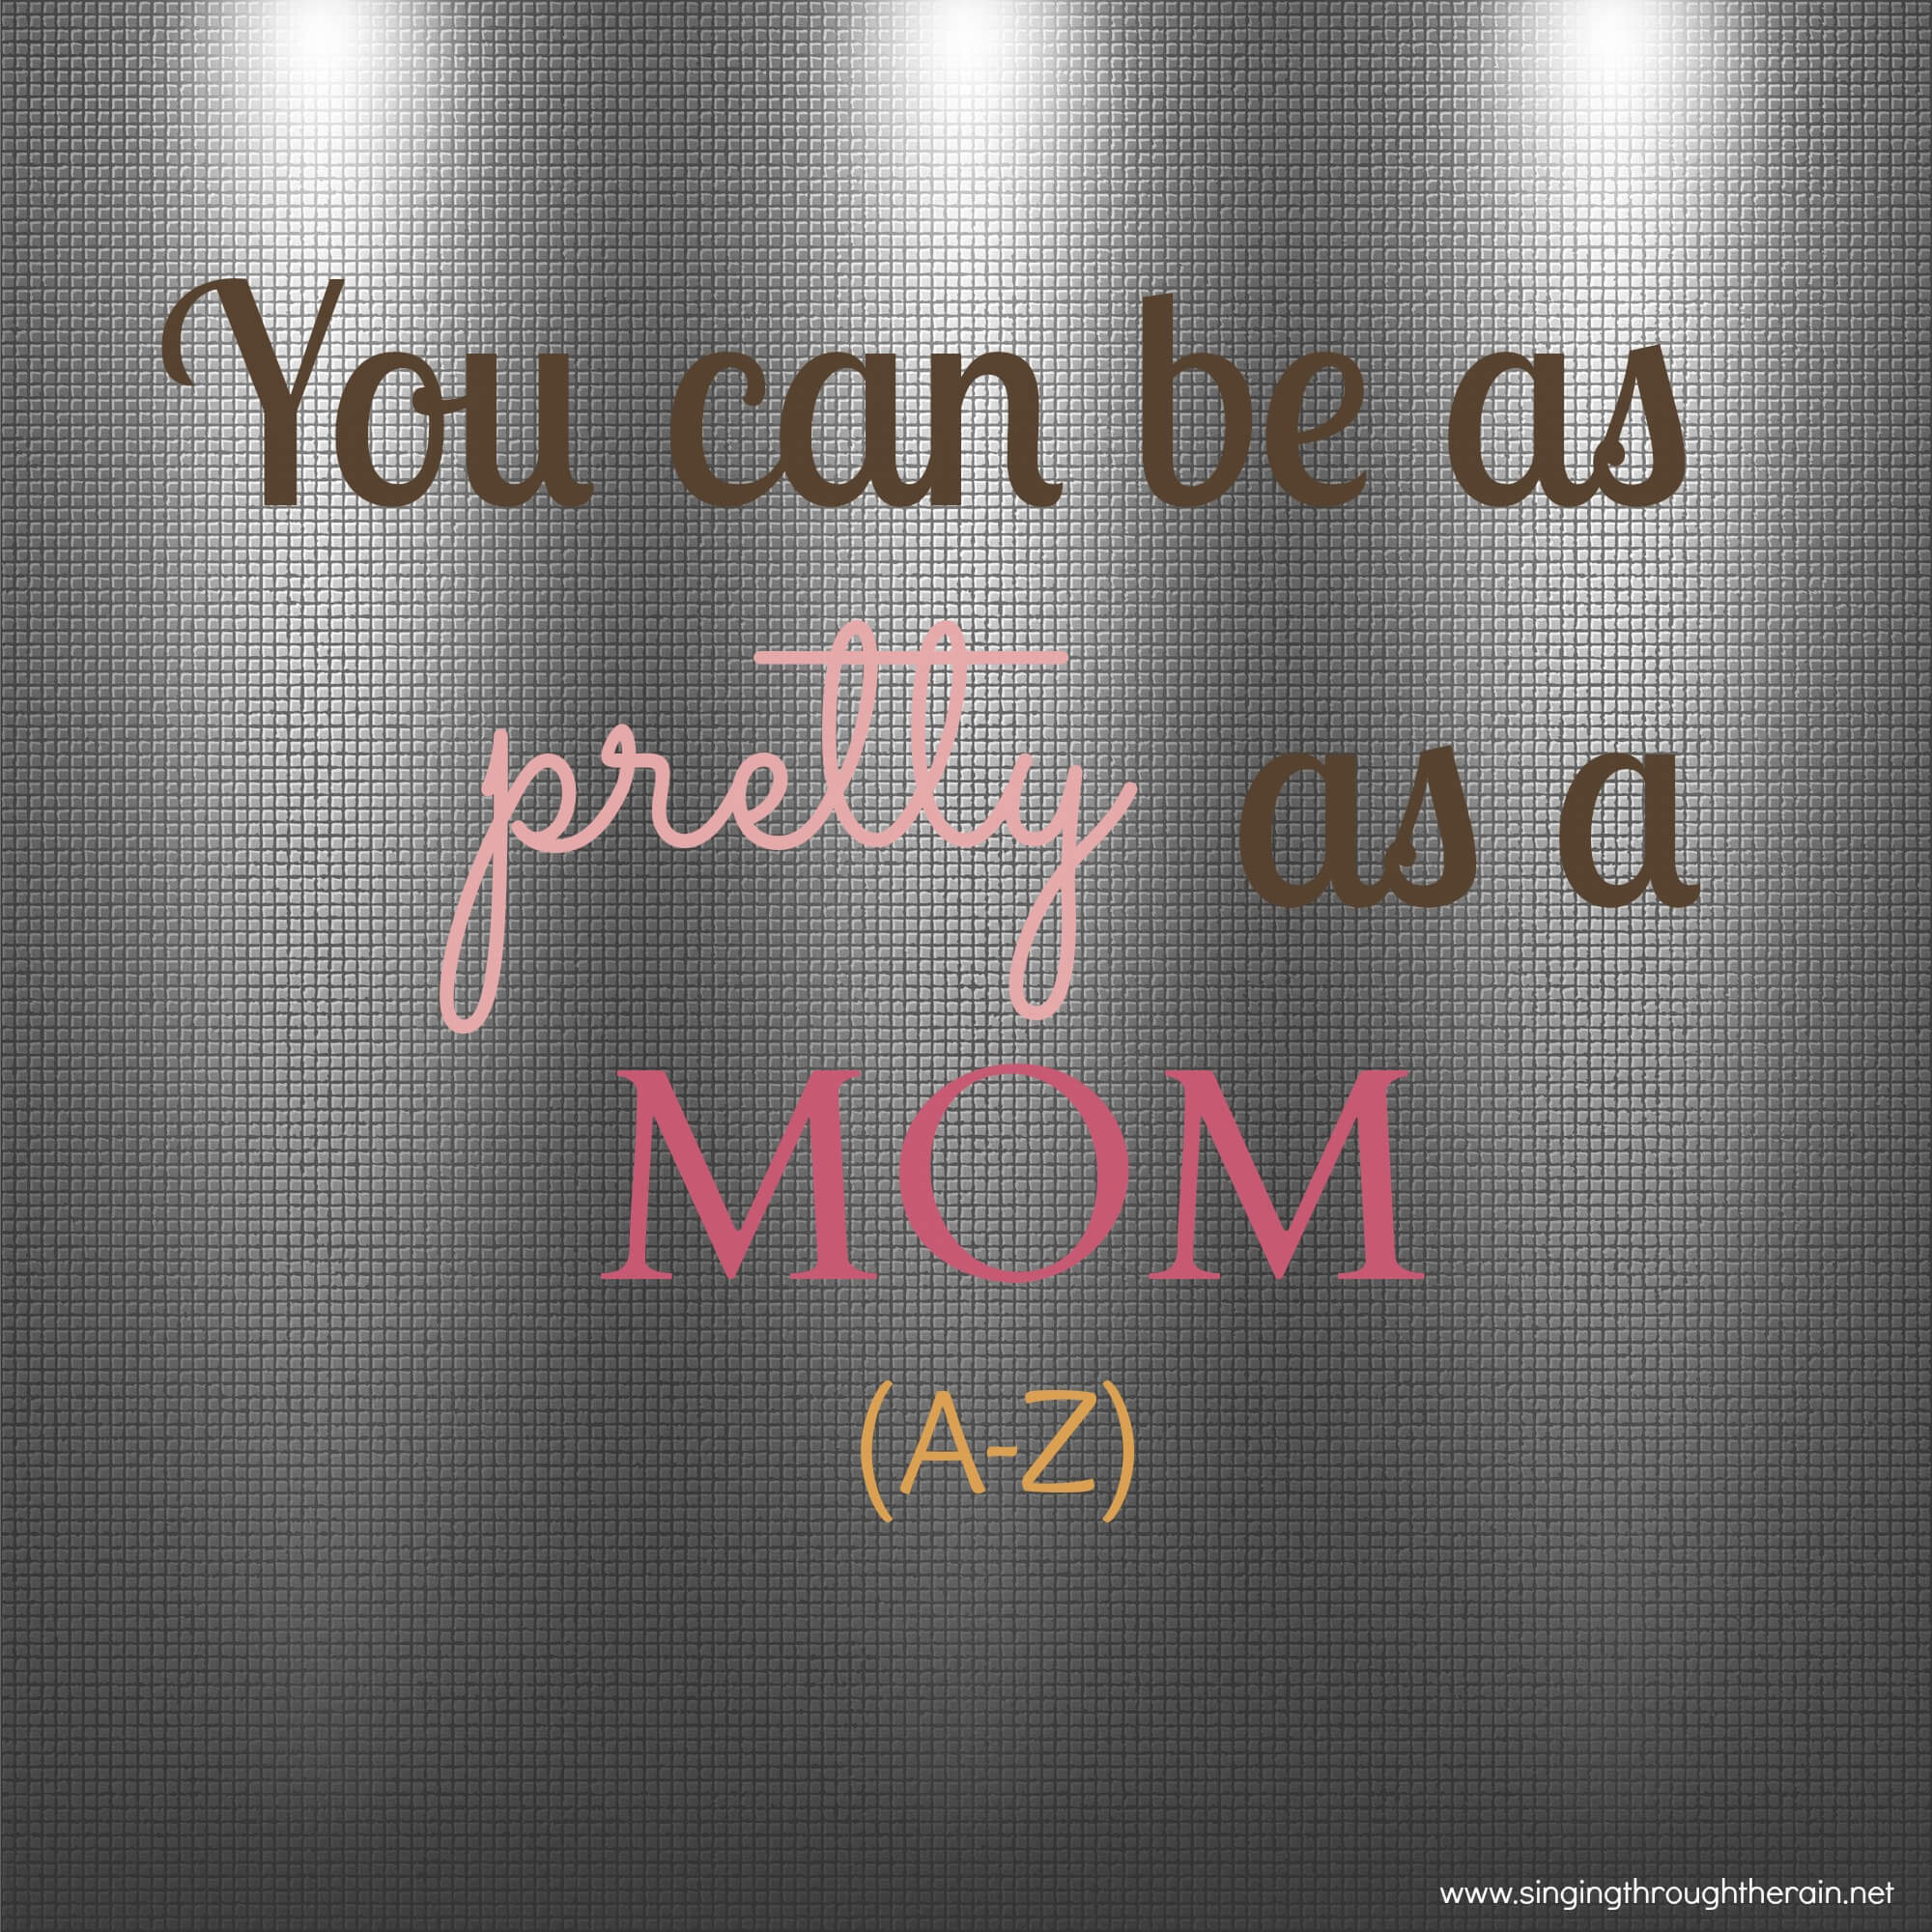 You Can Feel as Pretty as a Mom (A-Z)